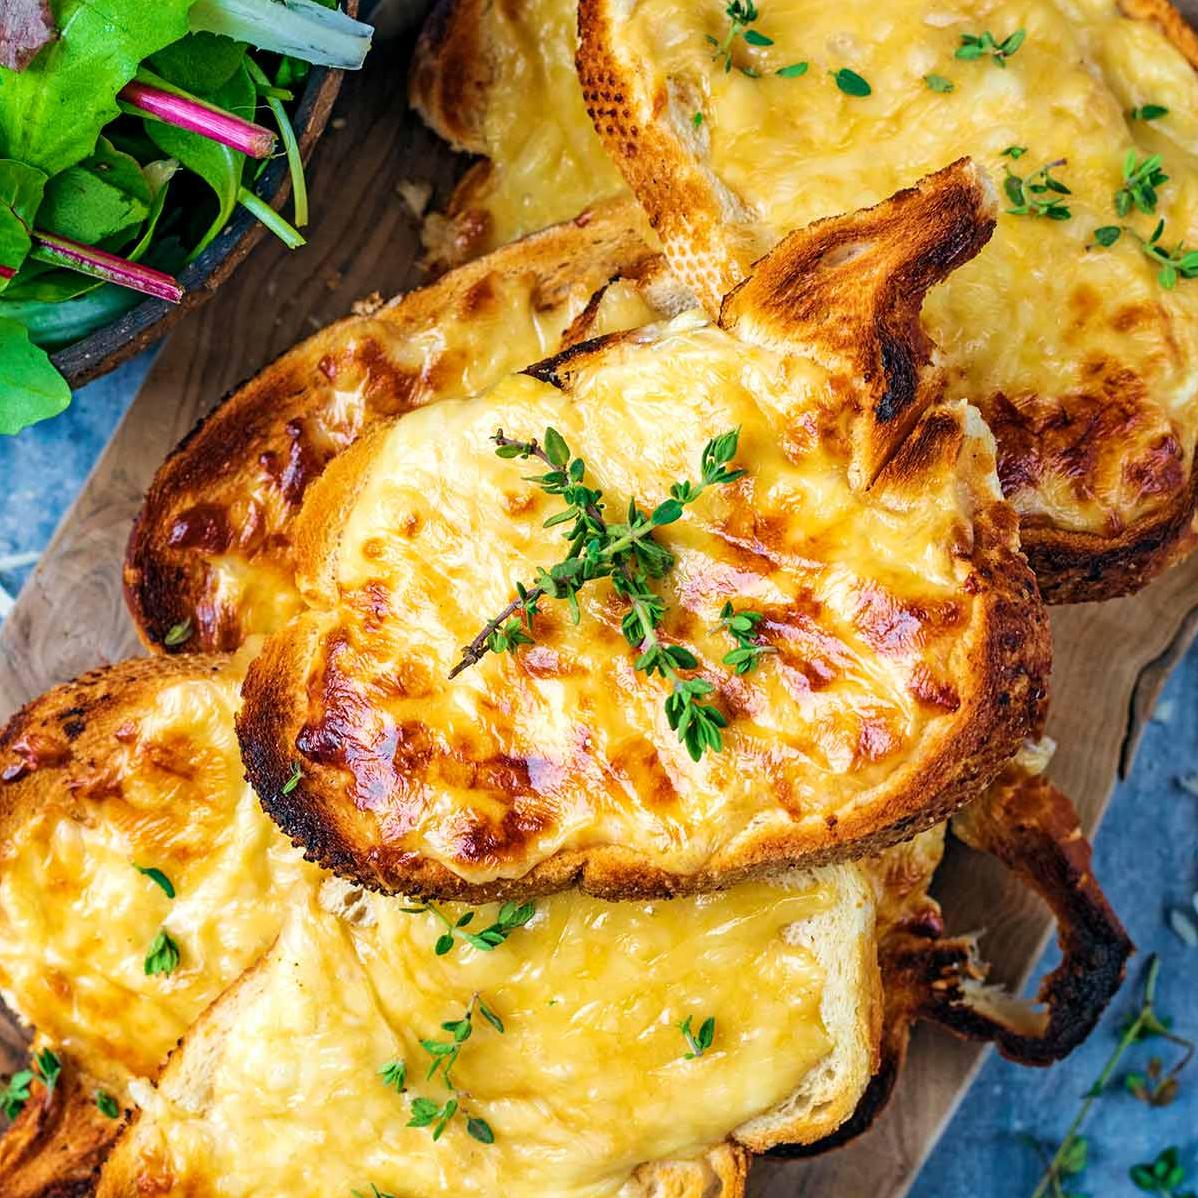  A perfect main dish or appetizer for any occasion, this Welsh Rarebit is easy and quick to make with minimal ingredients.